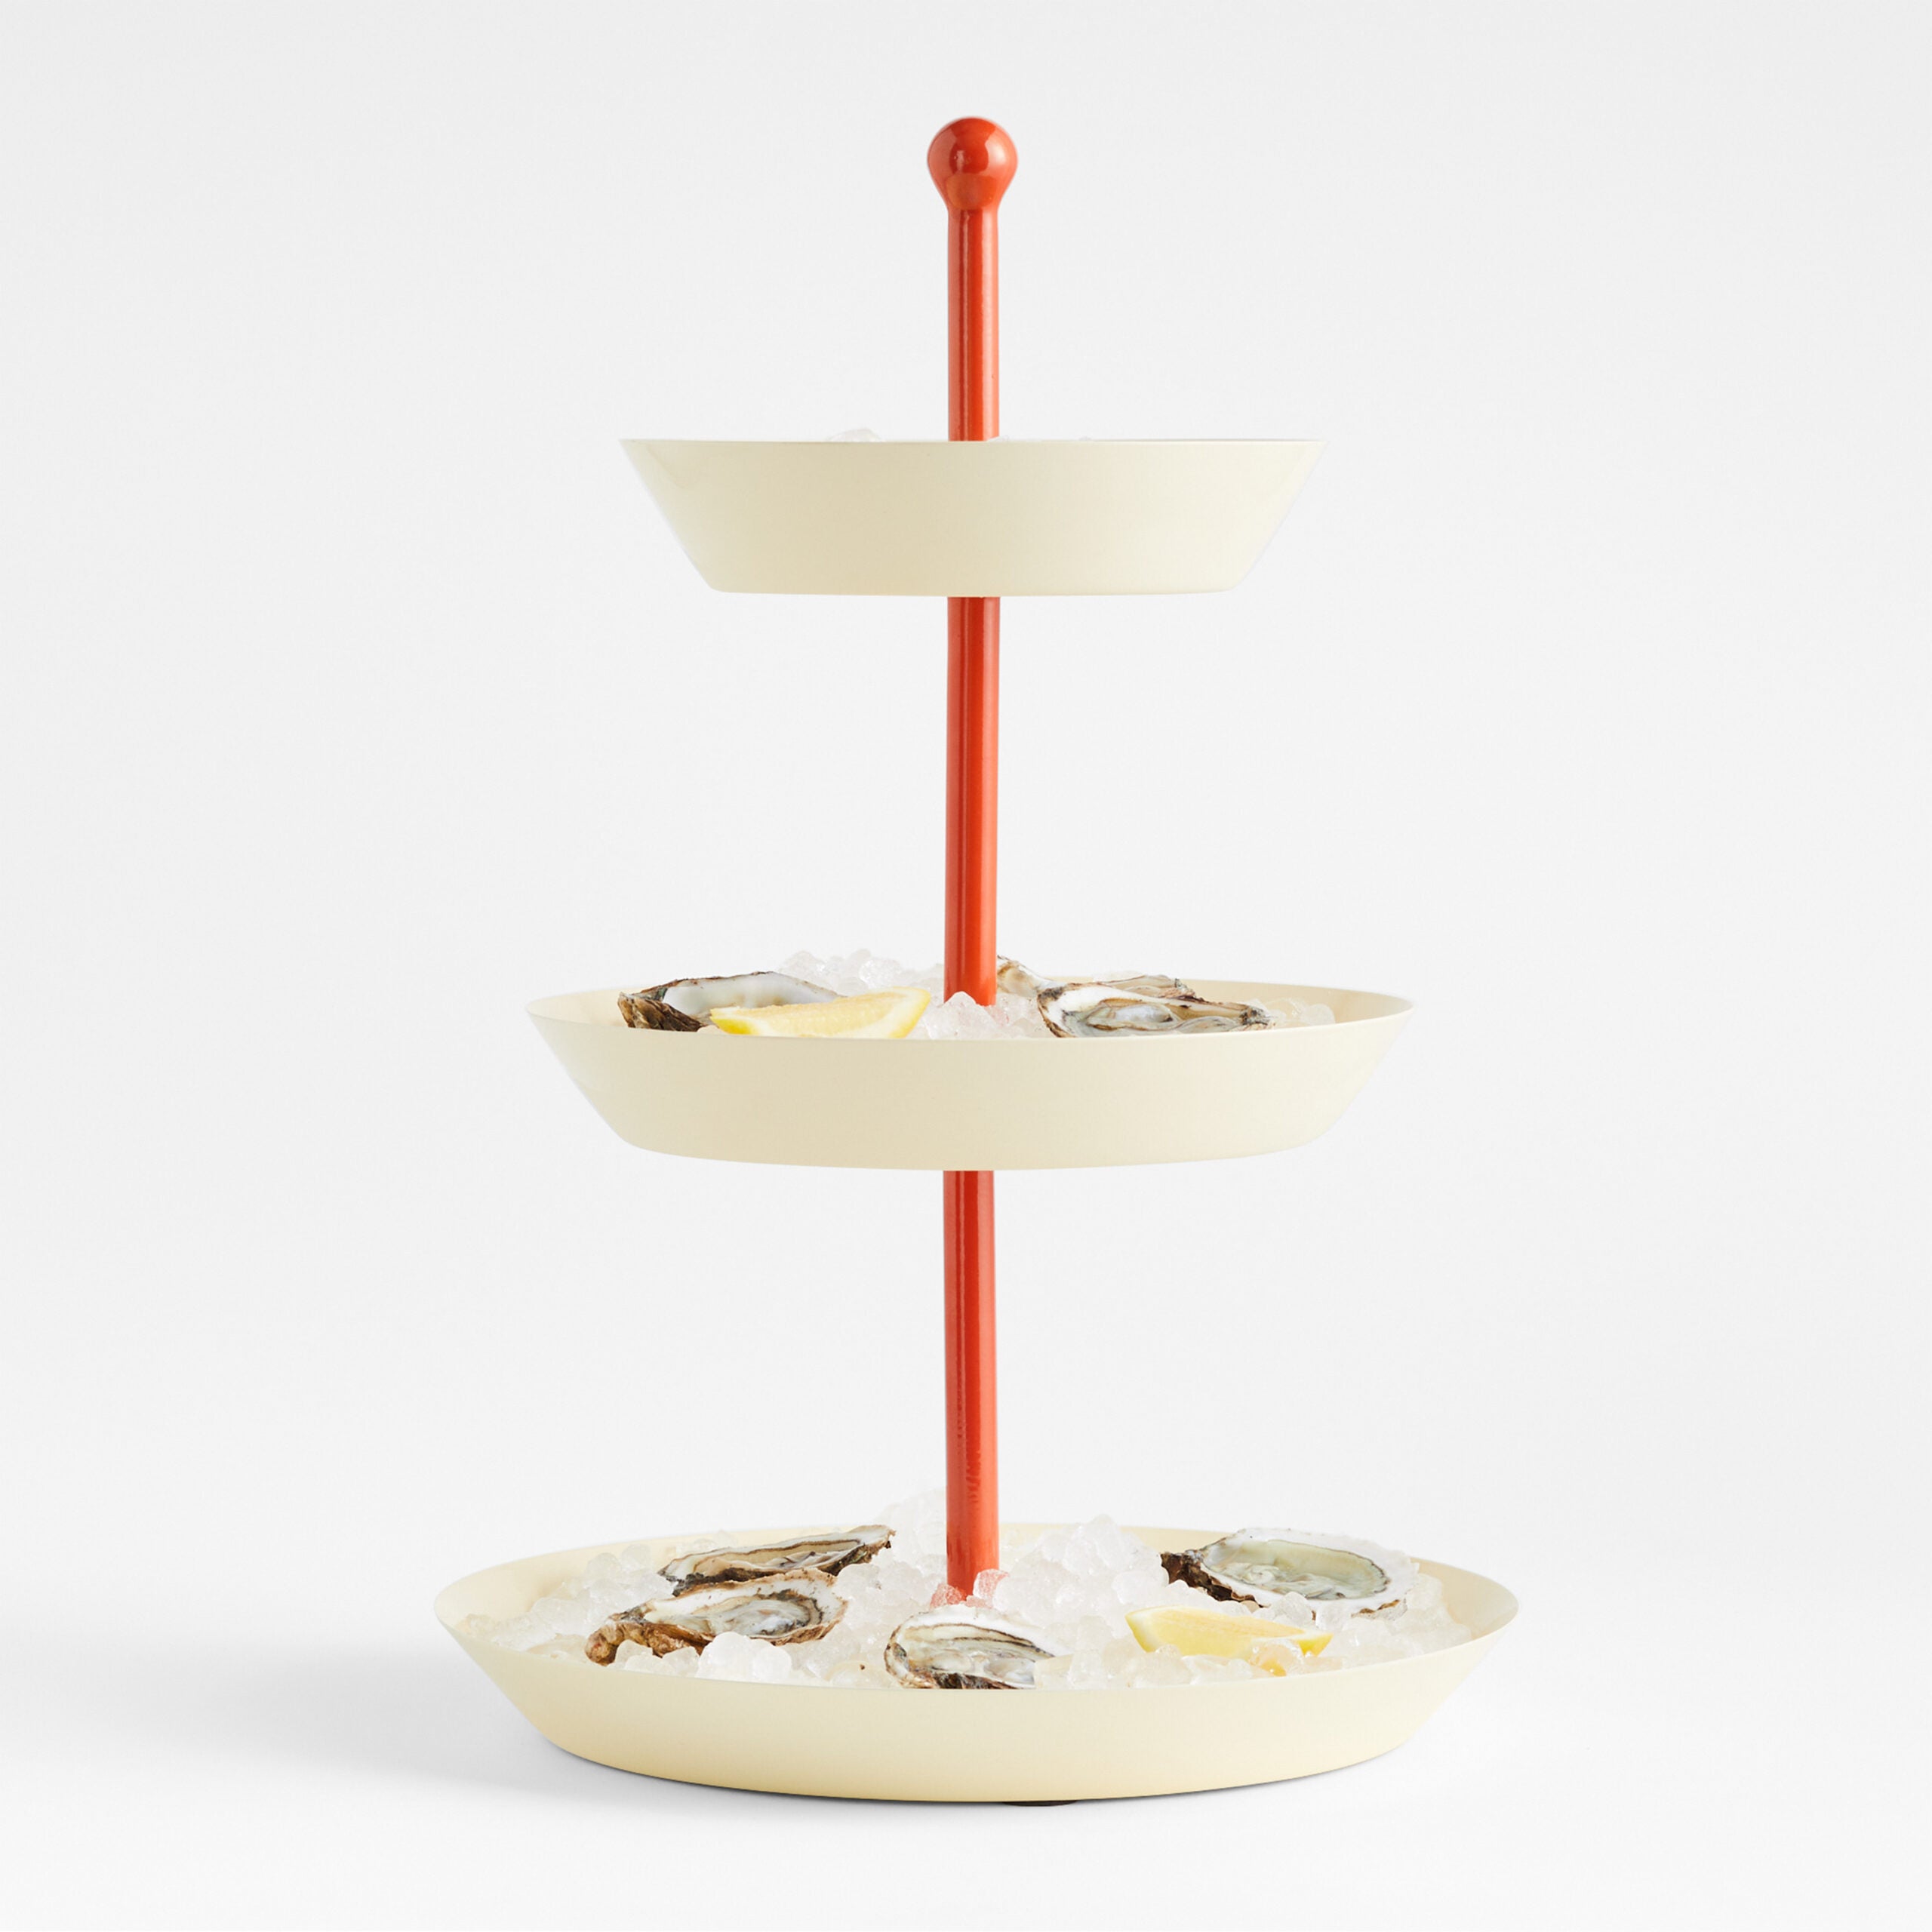 Anything tower by Molly Baz for Crate & Barrel